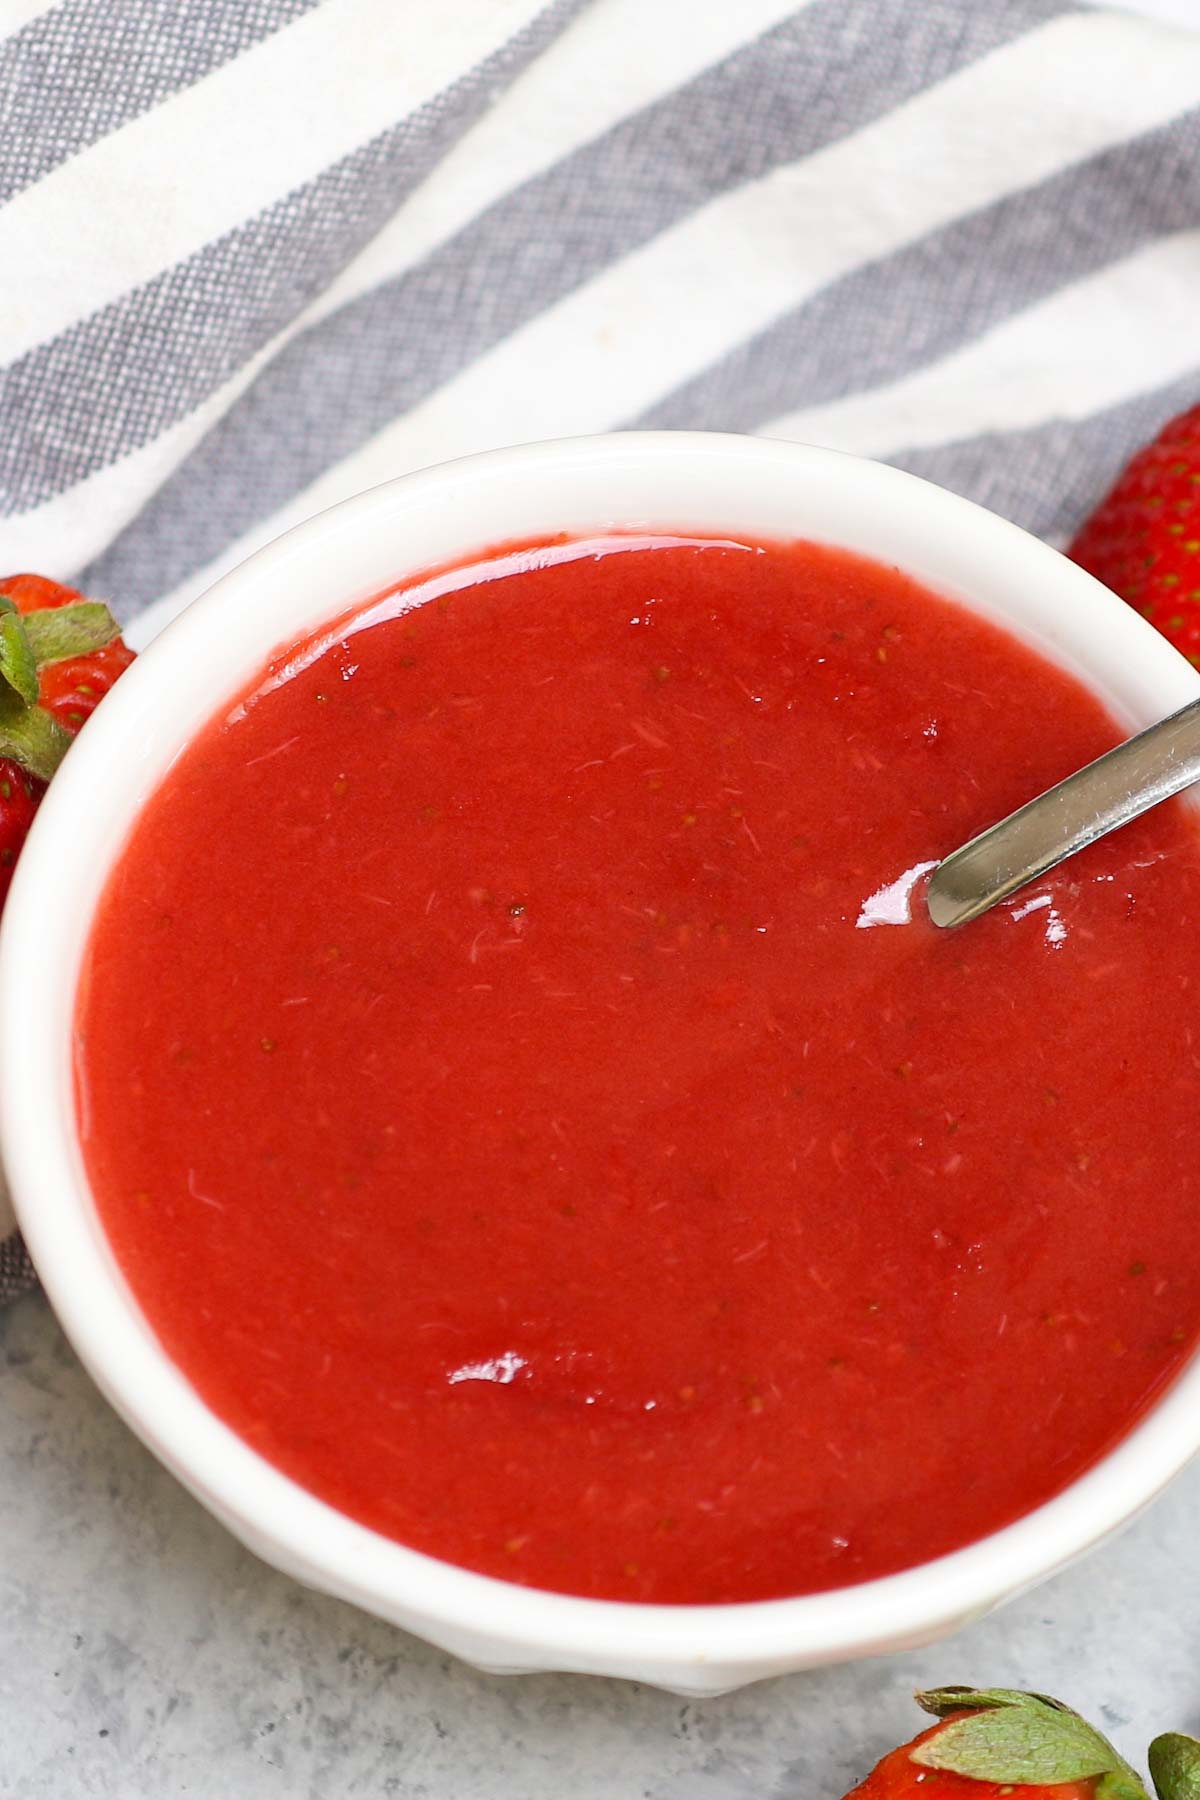 Whether you’re baking a pie, cheesecake, or homemade donuts, there’s nothing quite like a tasty Strawberry Glaze to add a sweet finishing touch. This strawberry sauce is made from scratch with real, juicy strawberries